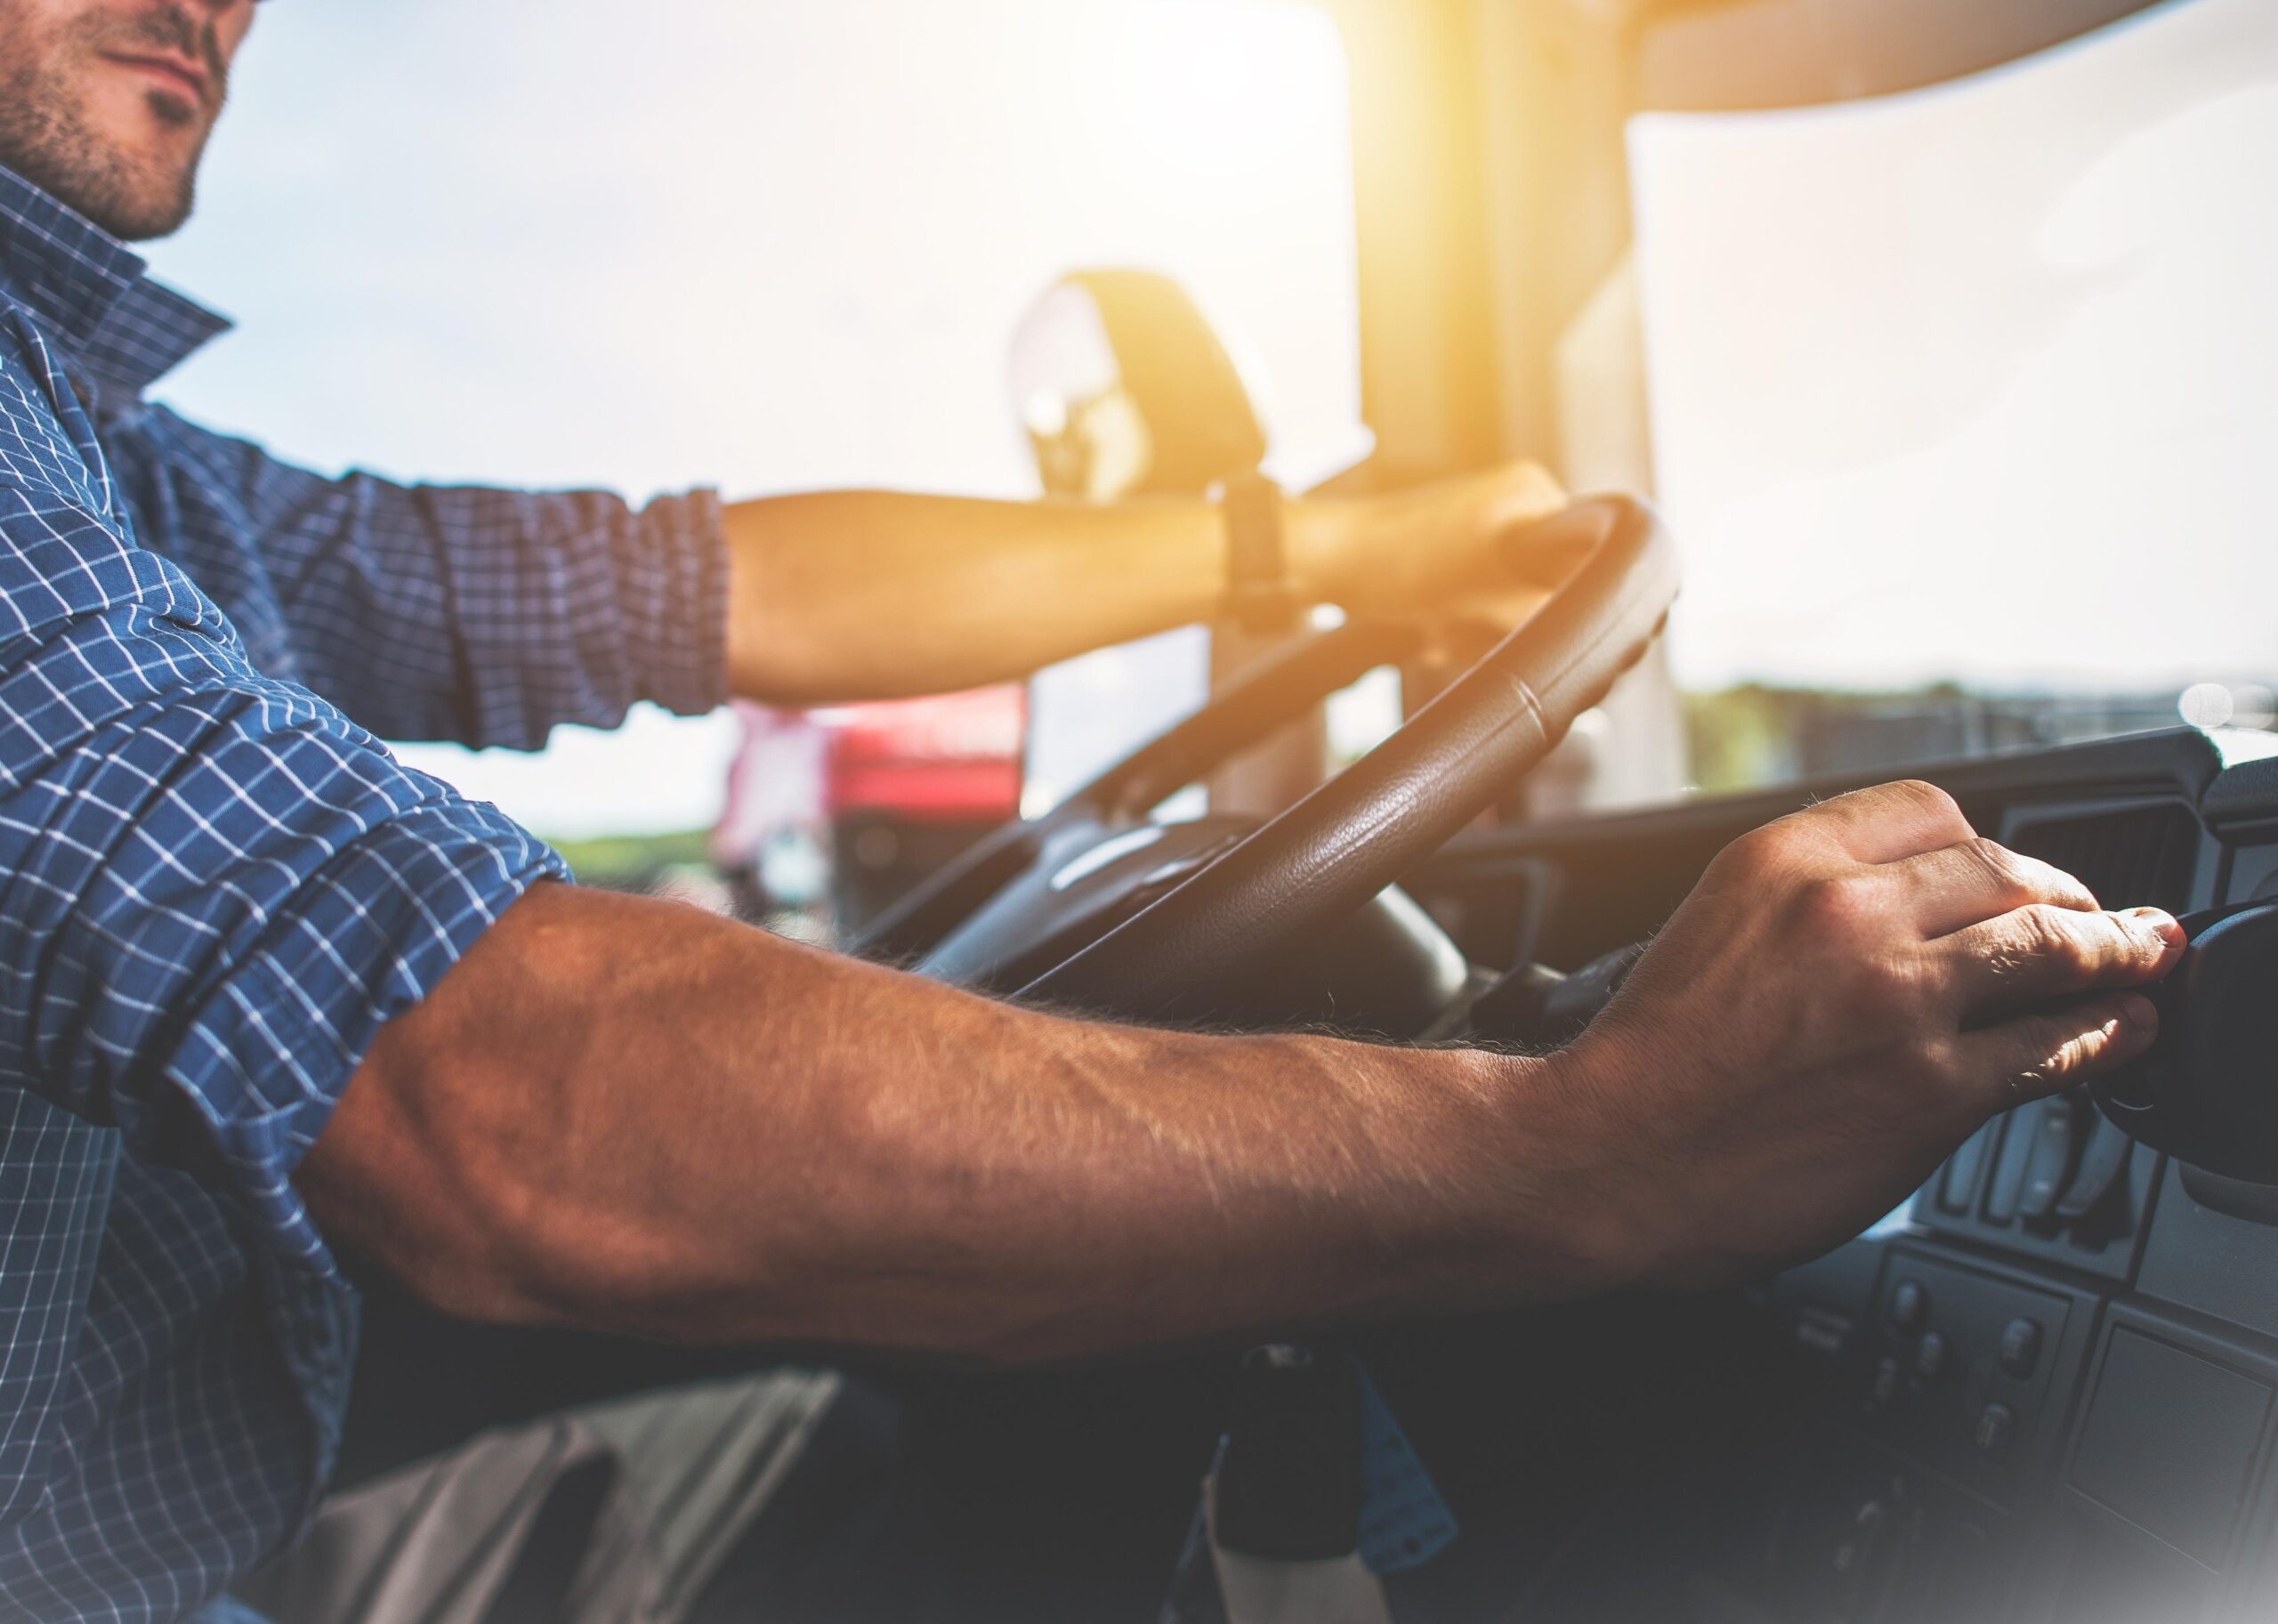 Truckinfo.net analyzed how retailers and truckers have adjusted to the evolving needs of consumers as e-commerce dominates the market.  